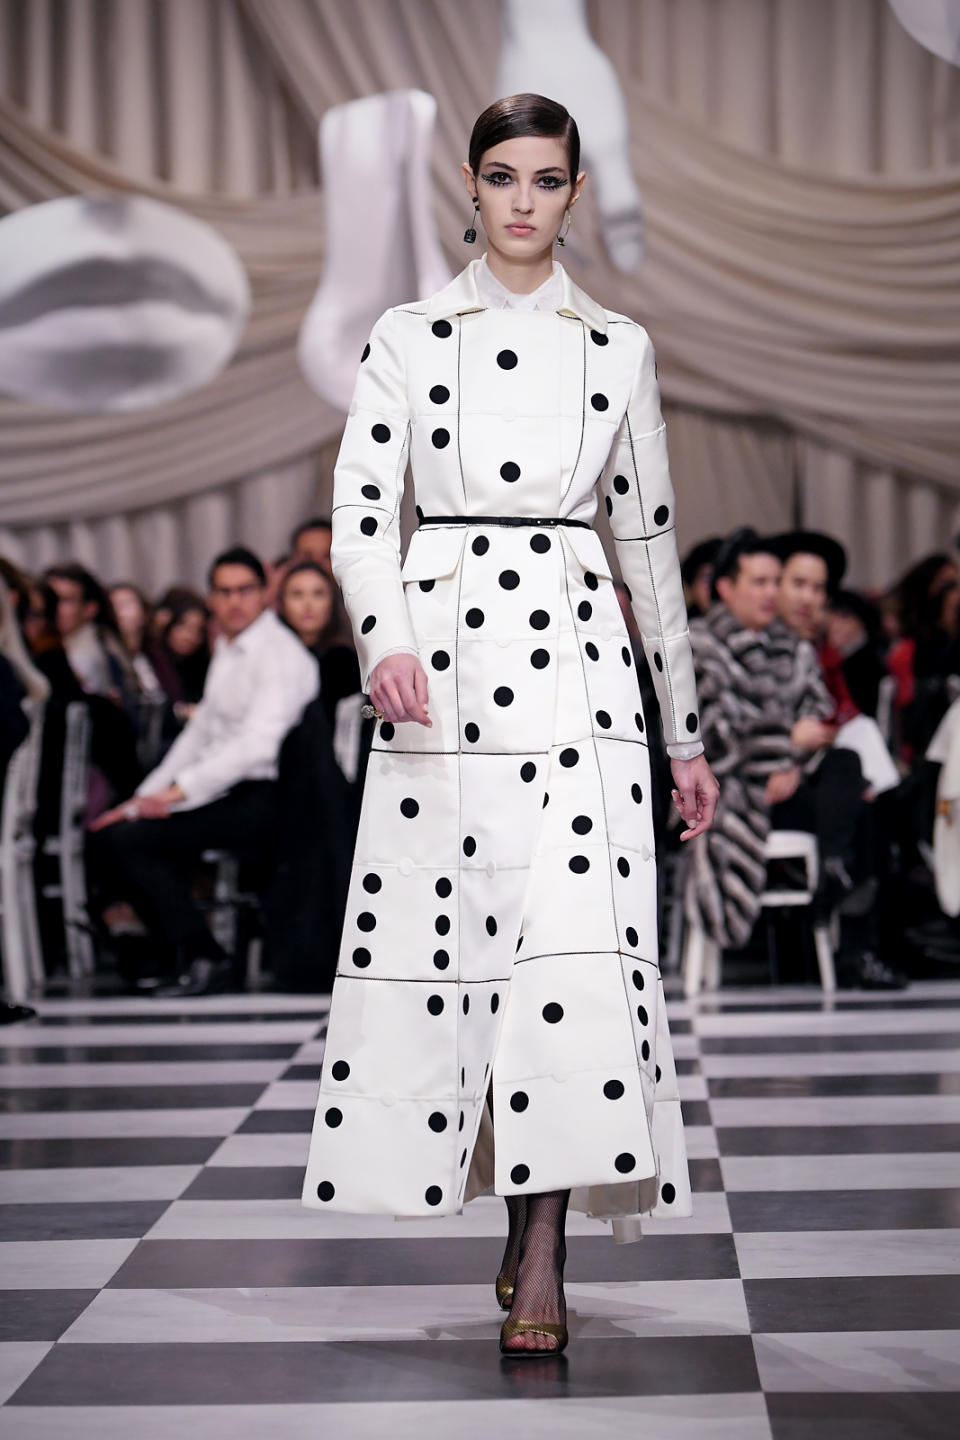 <p>A model wears a domino black and white themed trench coat from the Dior Haute Couture SS18 collection. (Photo: Getty) </p>